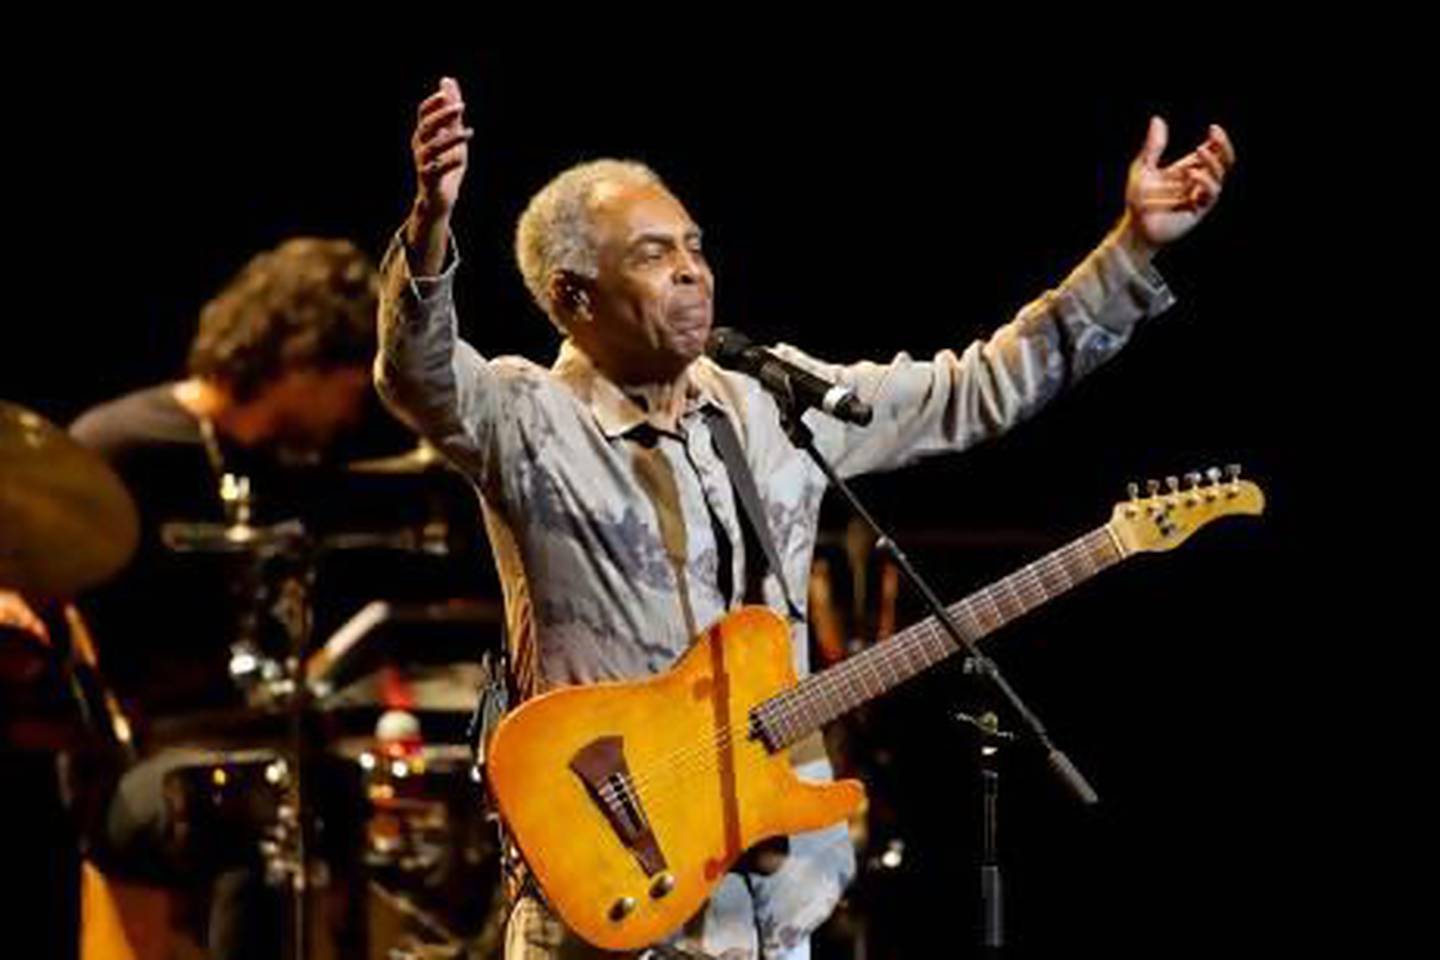 Gilberto Gil at his sold out show at Emirates Palace as part of the 2013 Abu Dhabi Festival. Photo: Abu Dhabi Festival